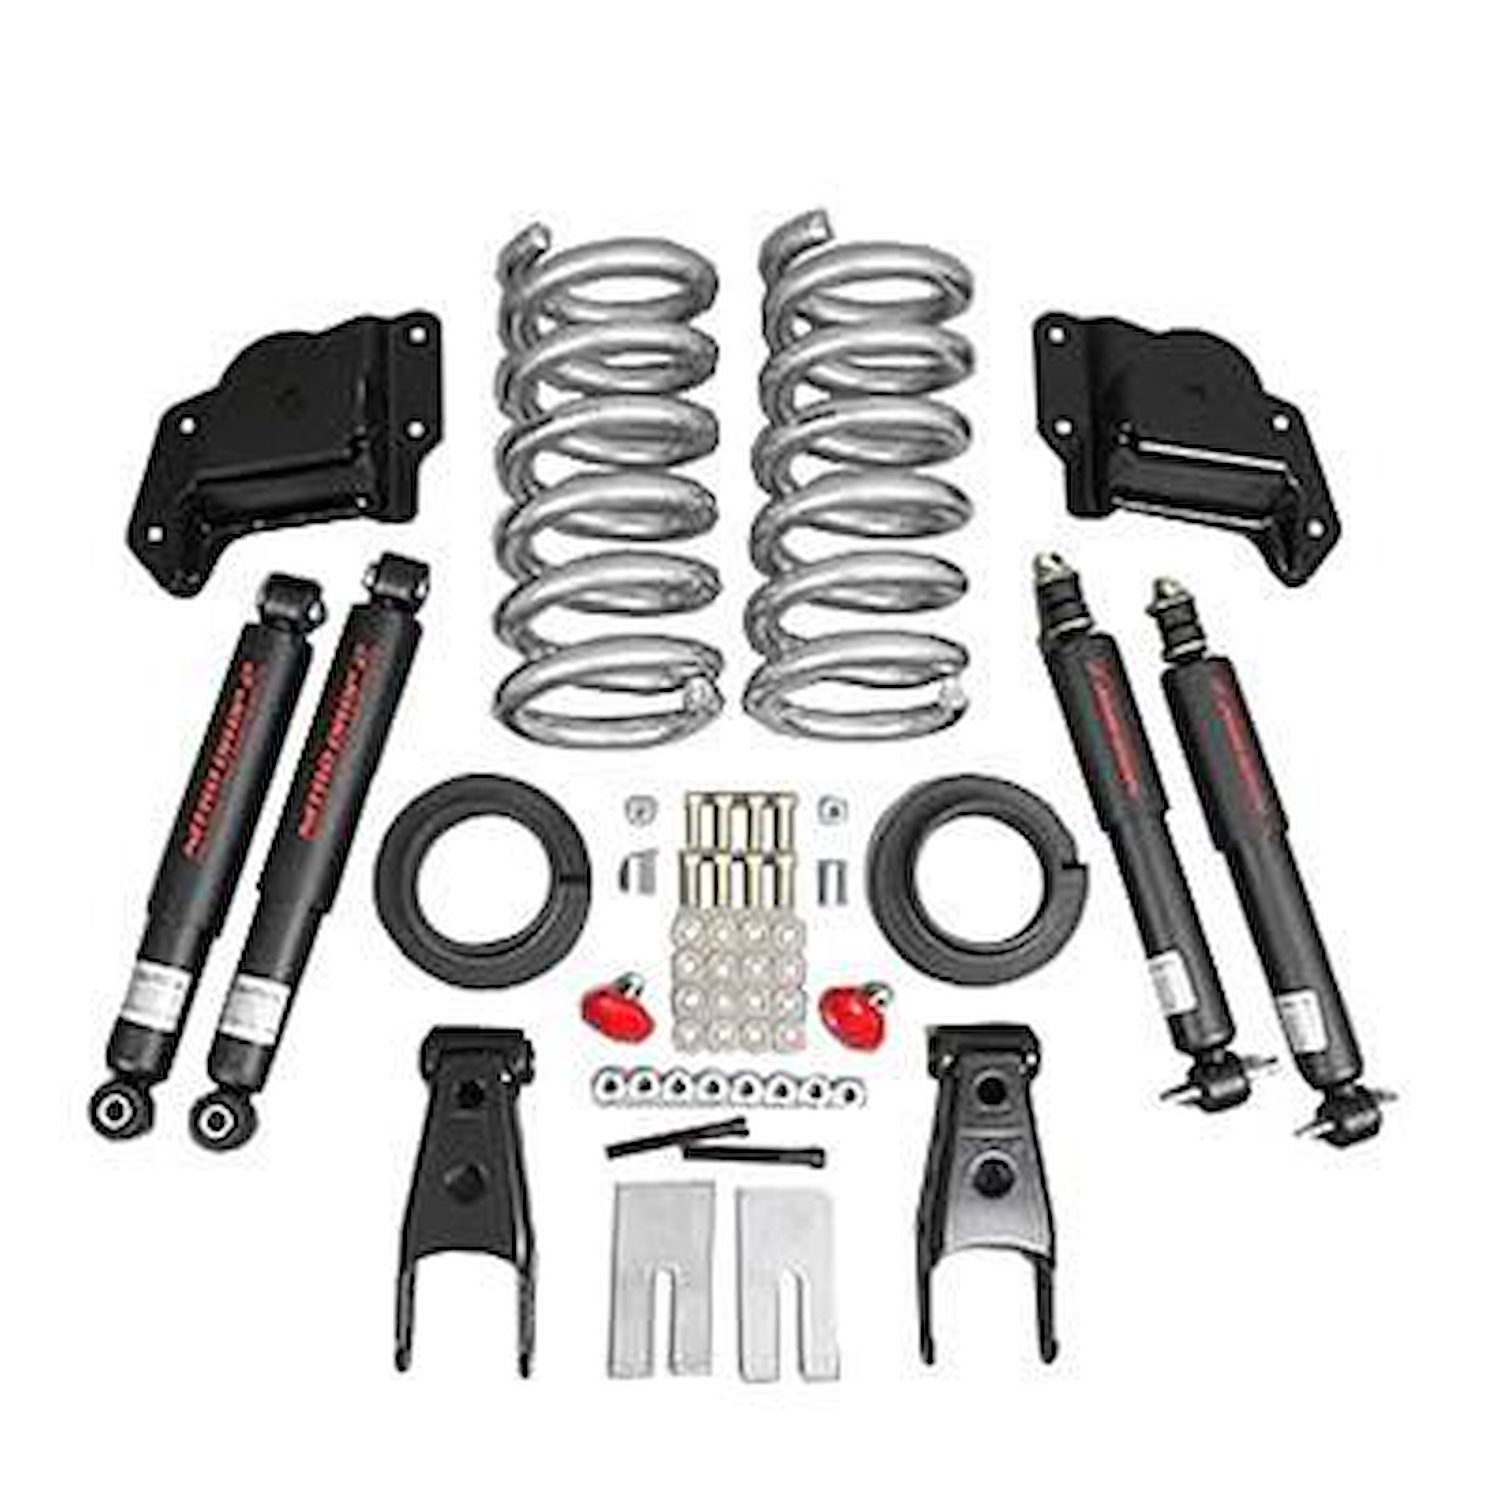 Complete Lowering Kit for 2007-2013 Chevy Avalanche